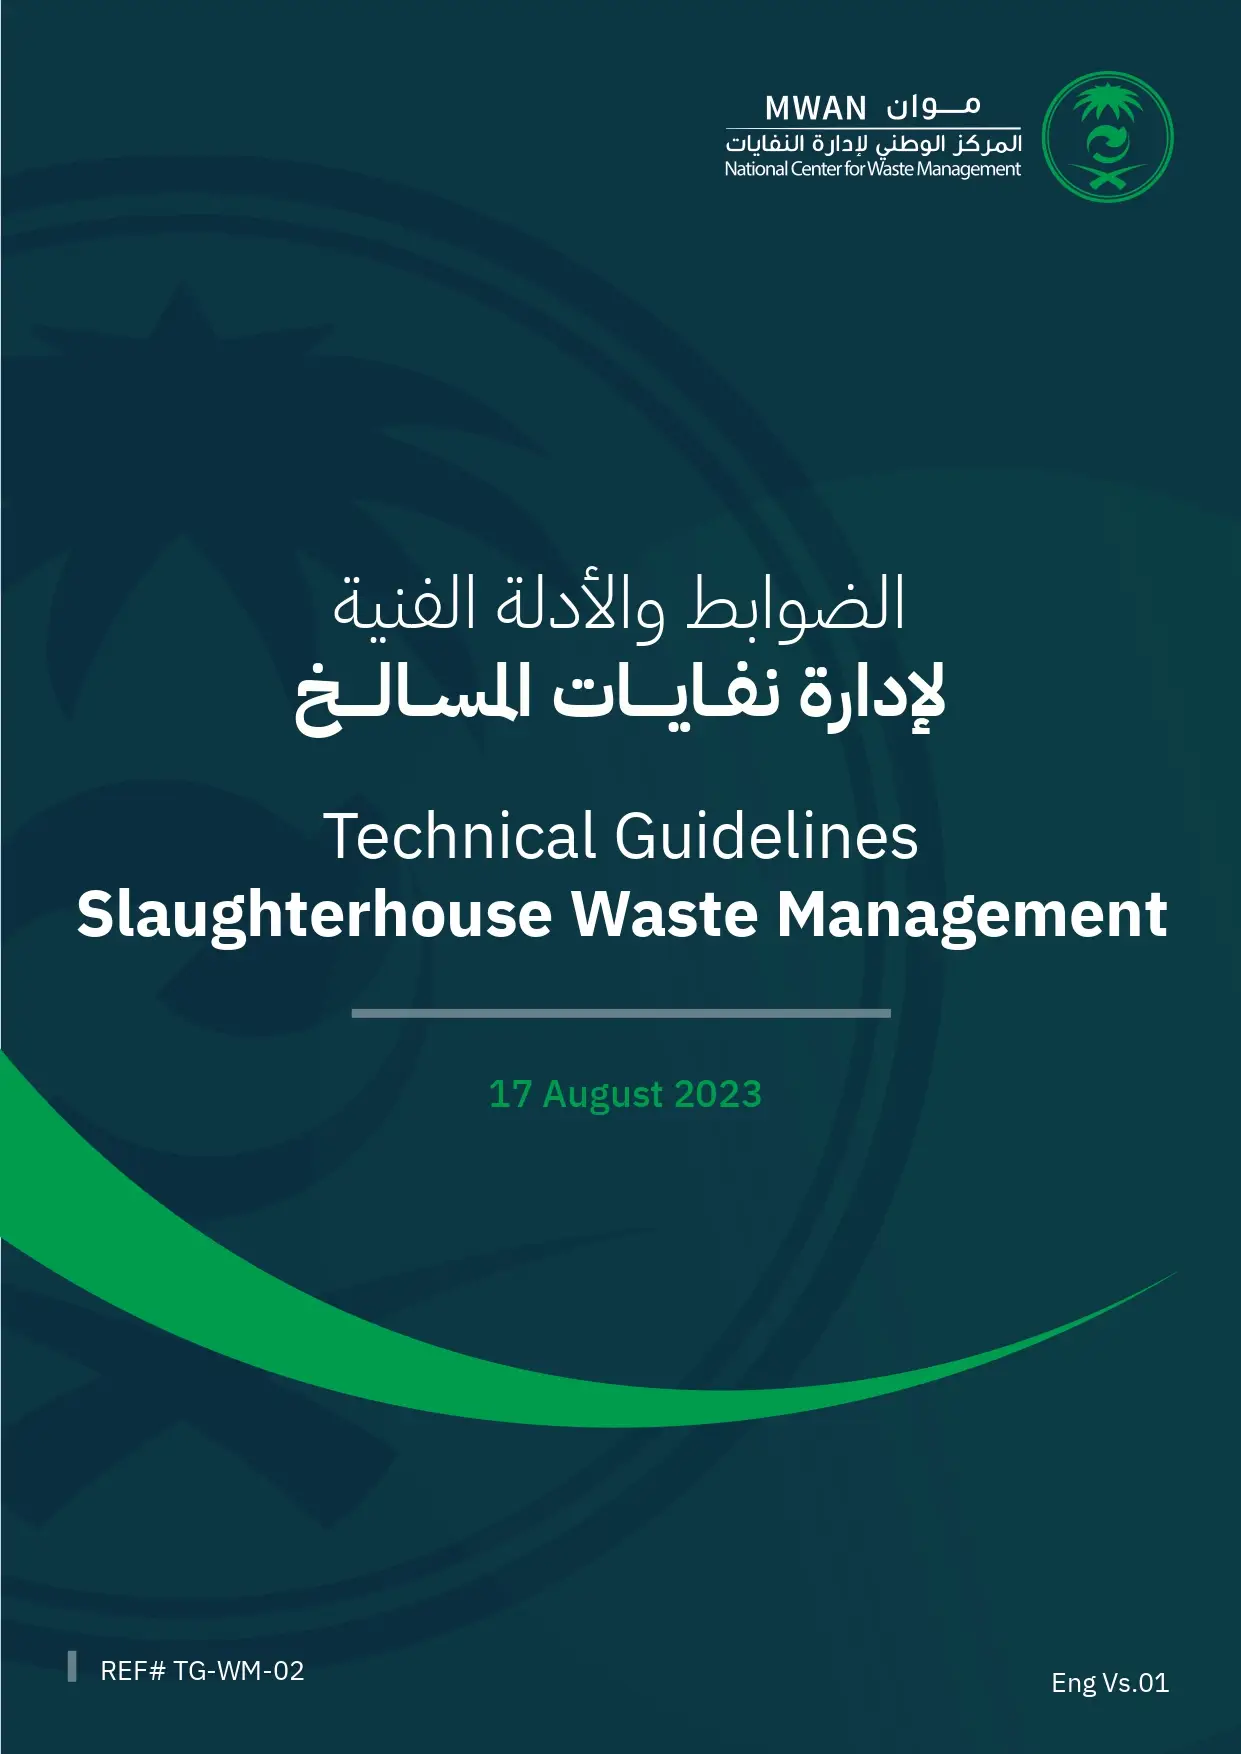 Technical Guidelines Slaughterhouse Waste Management